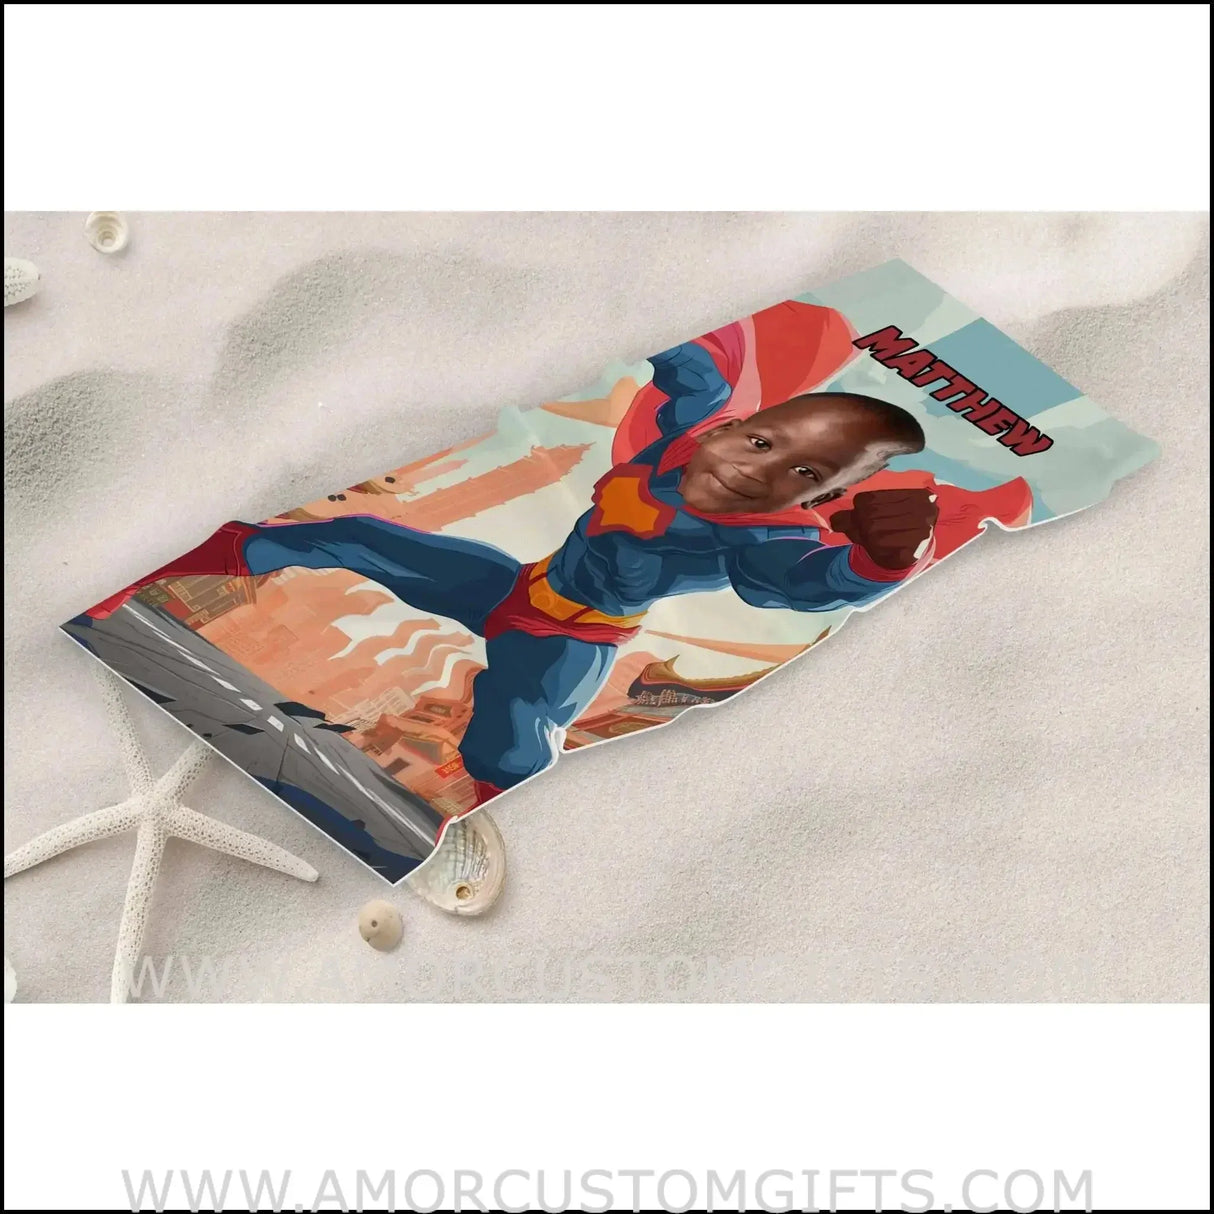 Towels Personalized Super Boy Japanese City Photo Beach Towel | Customized Name & Face Boy Towel